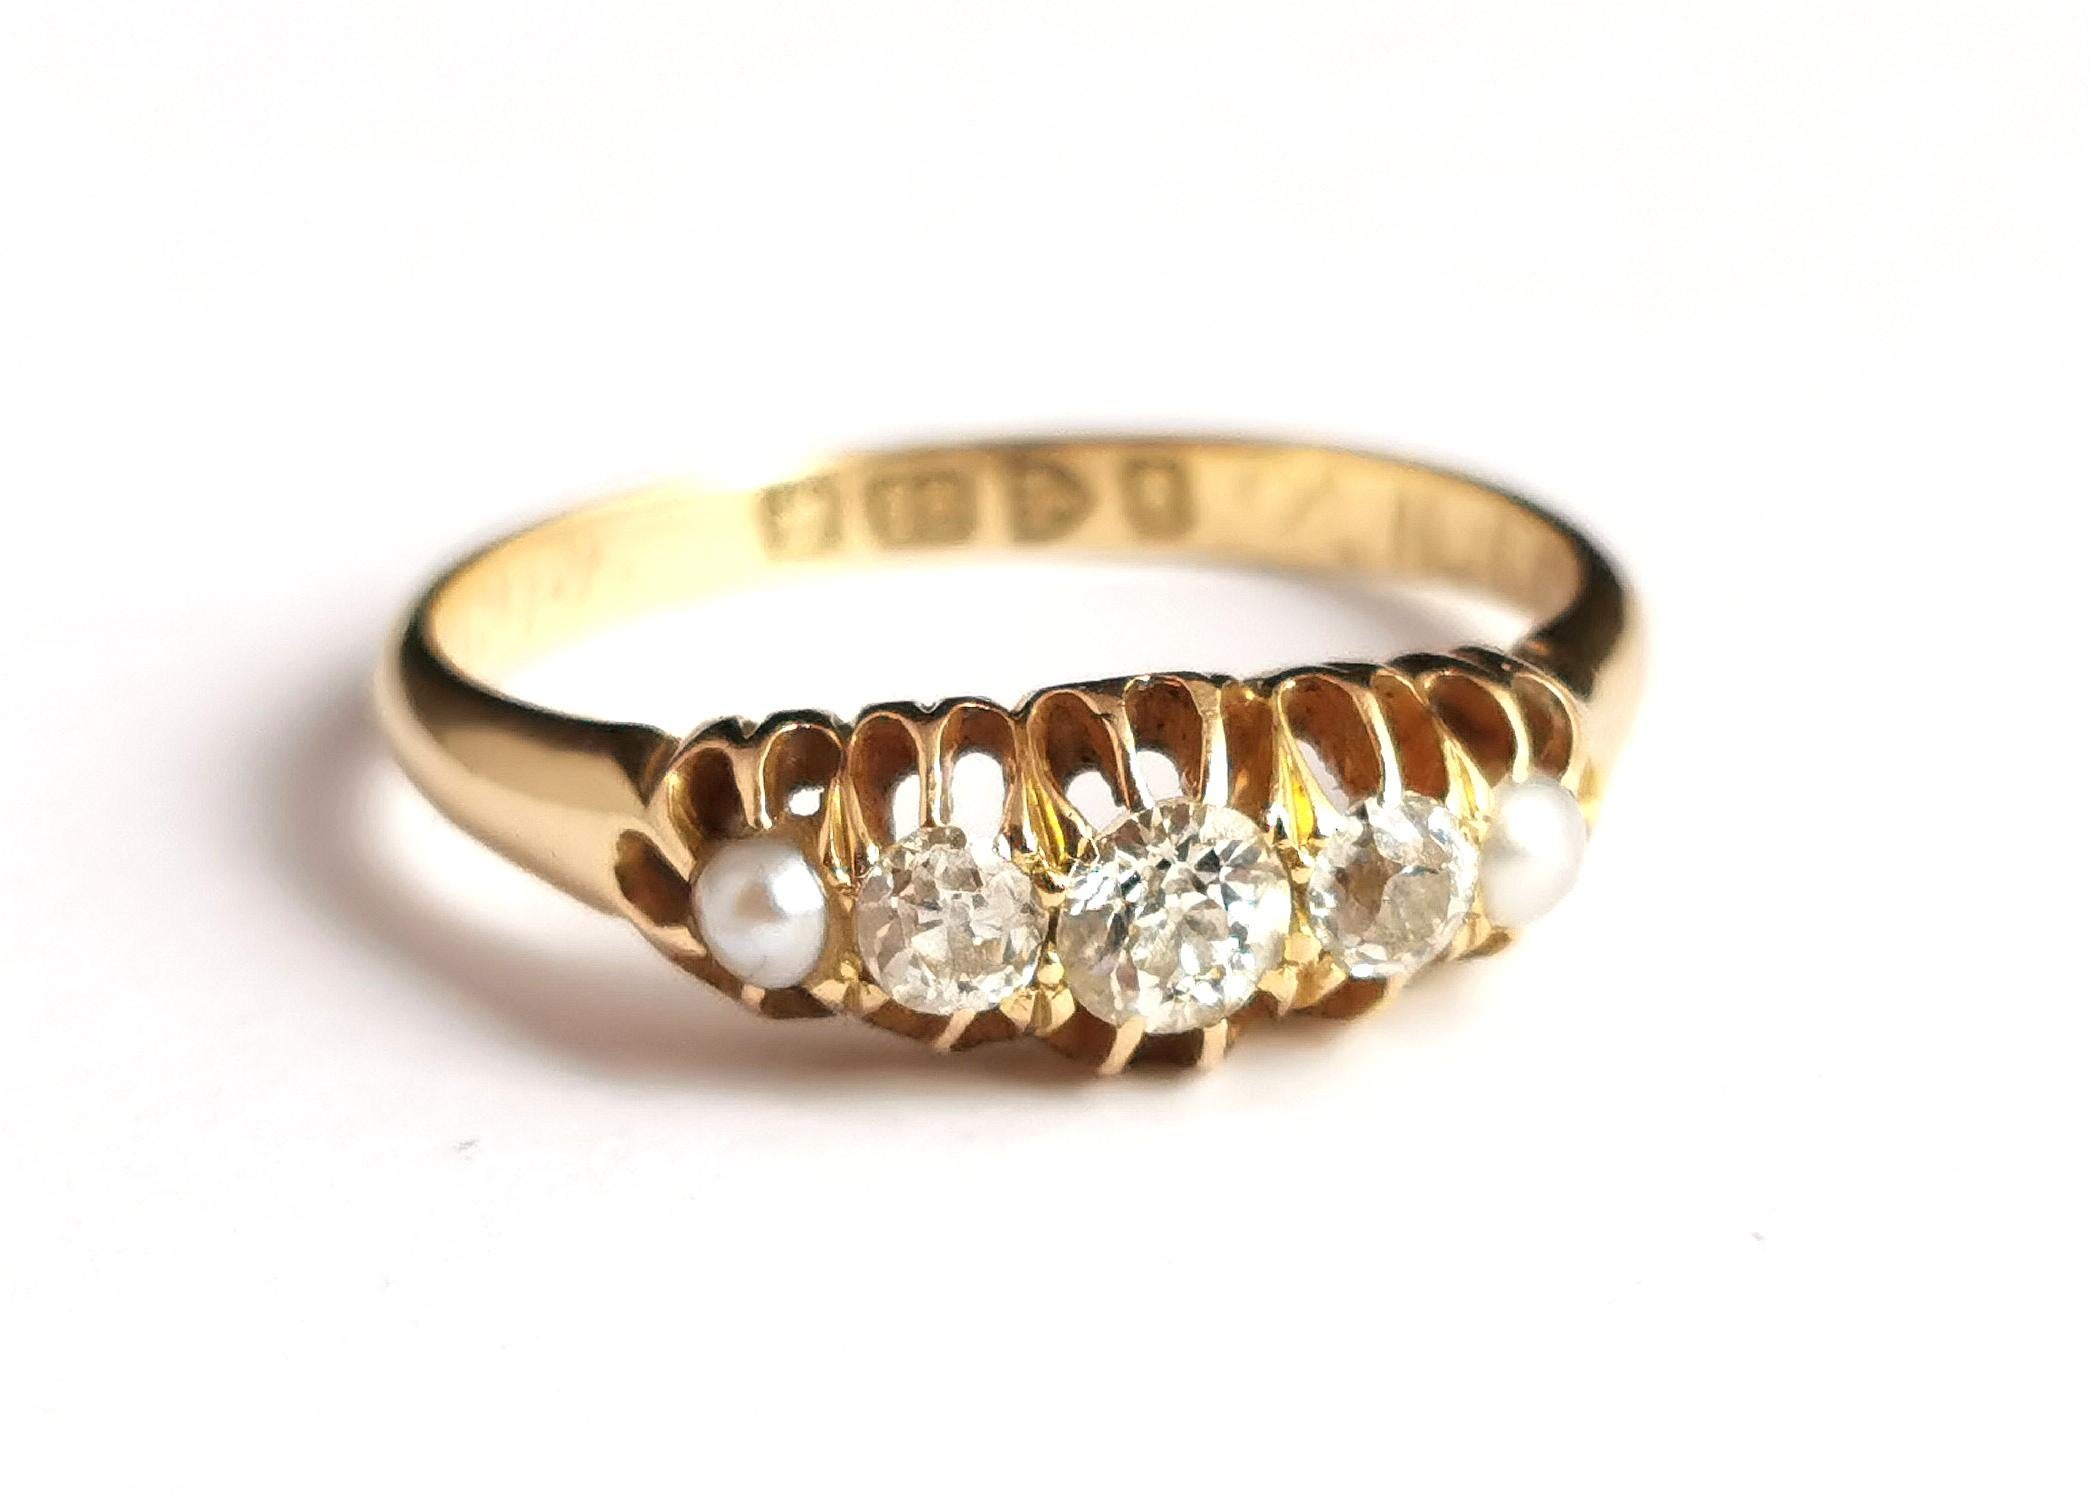 Antique Diamond and Pearl Ring, Five Stone, 18k Yellow Gold, Edwardian 11